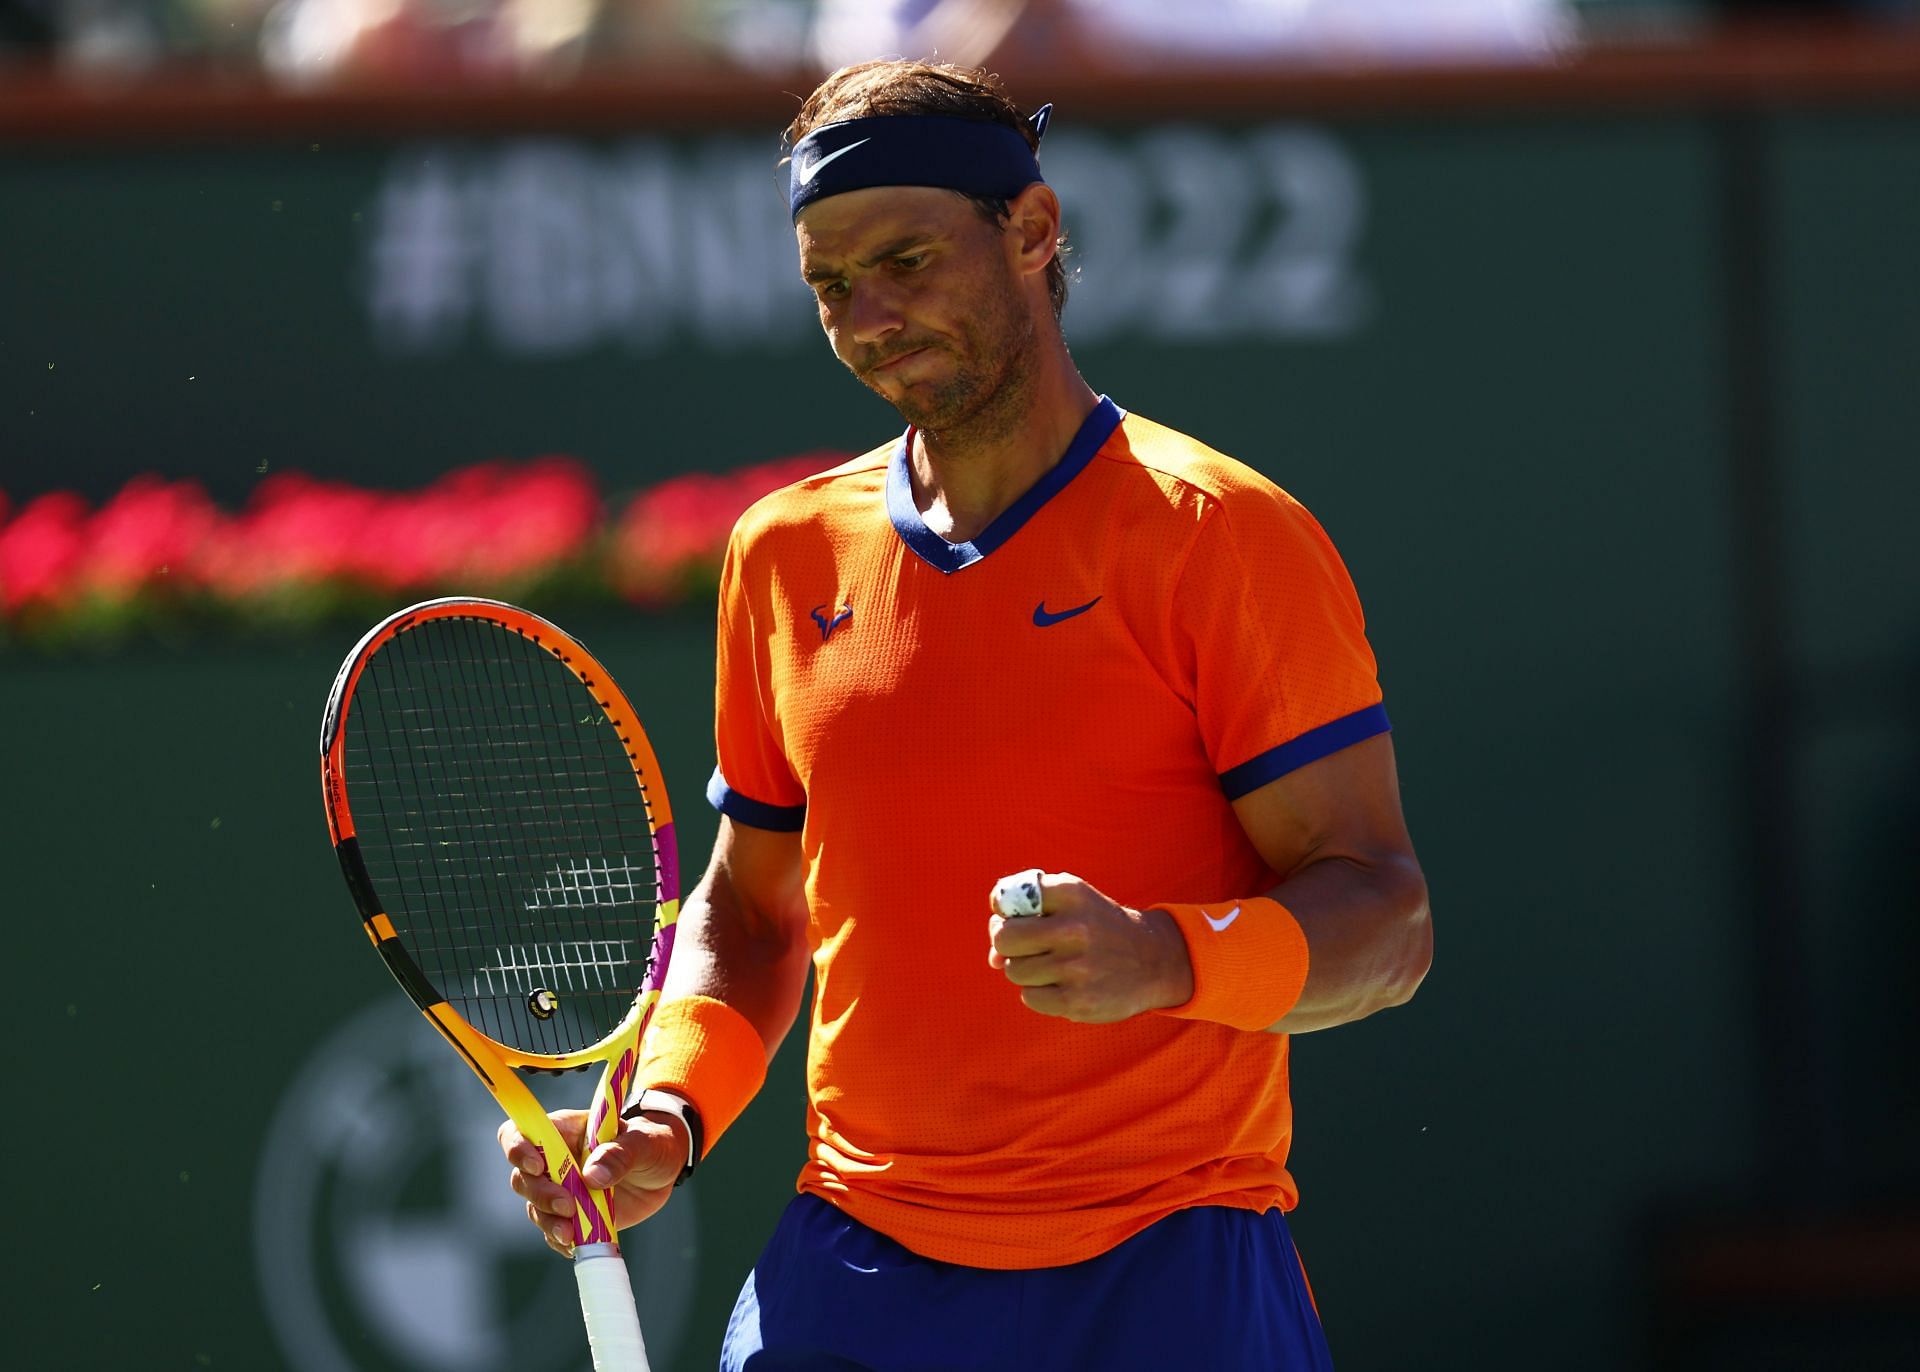 Rafael Nadal celebrates a point against Dan Evans at the Indian Wells Masters